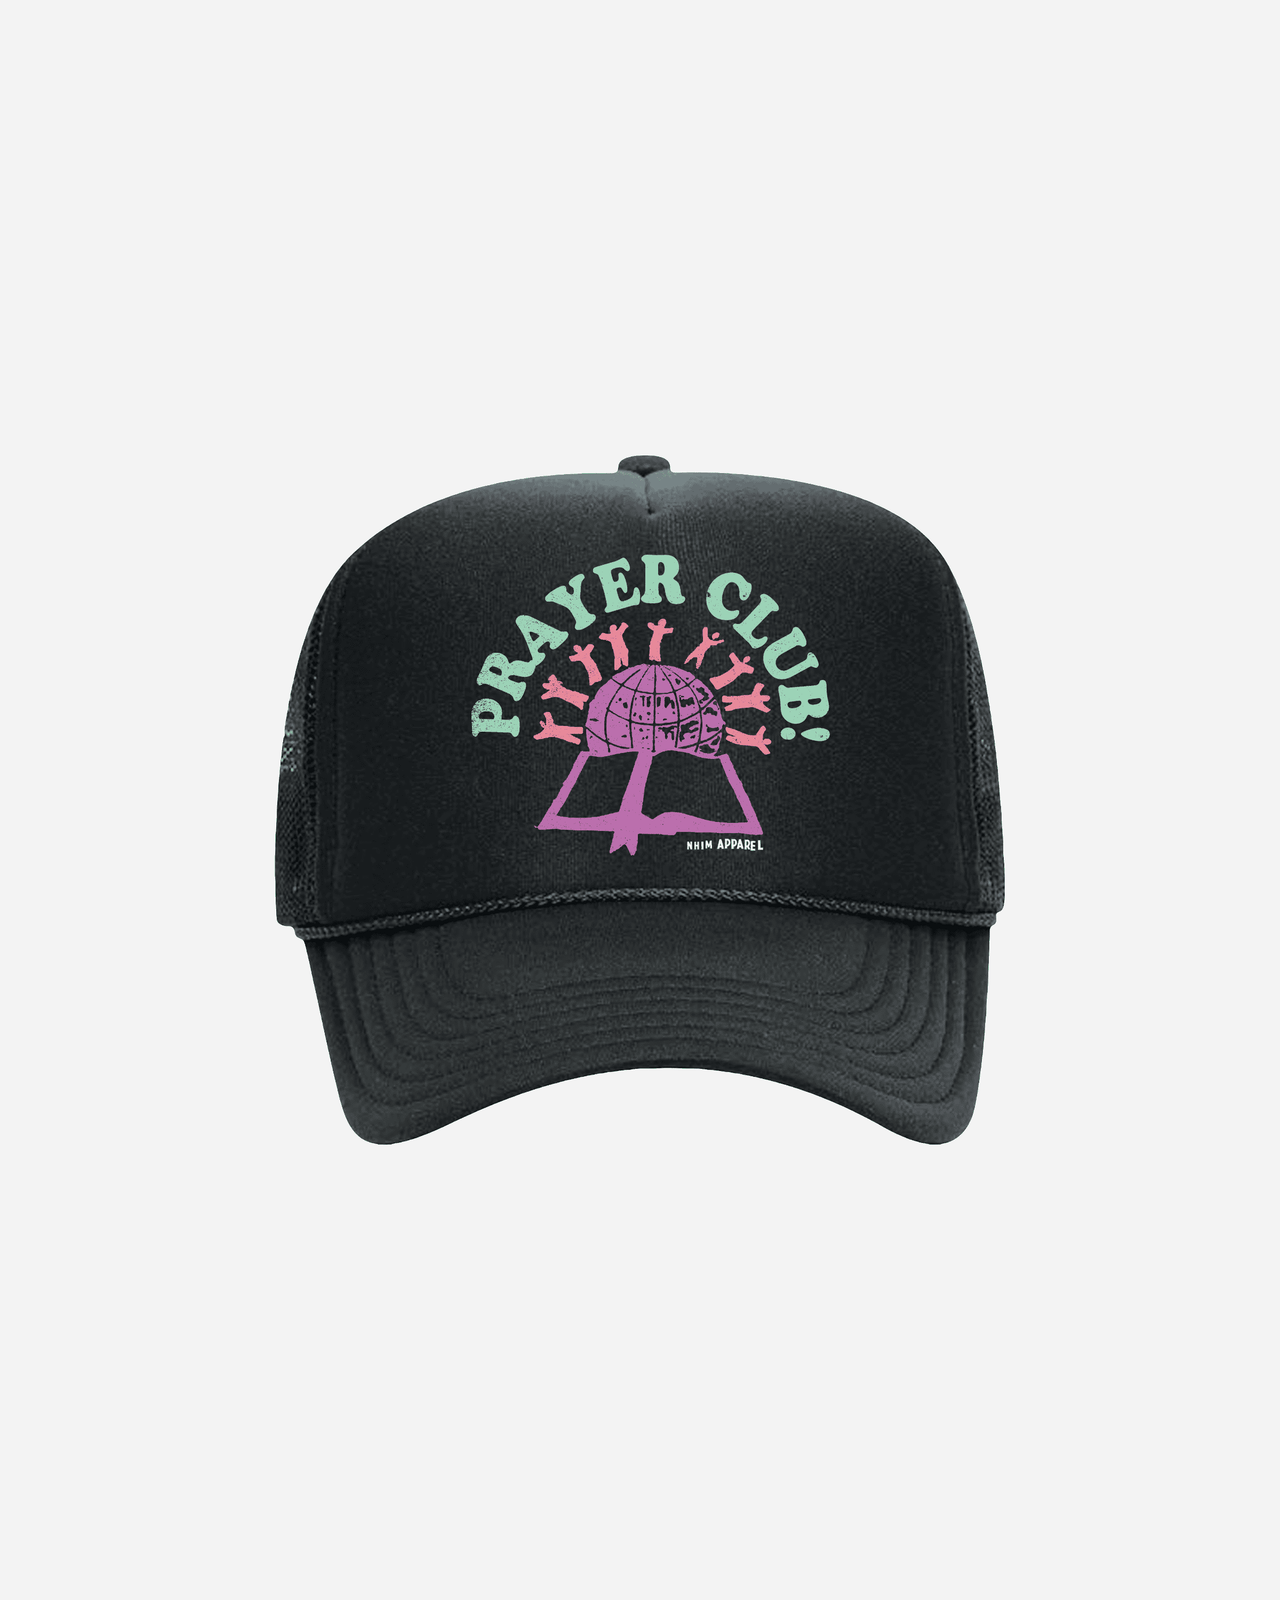 Prayer Club black colored christian trucker hat with green, pink, purple graphic of people on the world with a bible made by NHIM APPAREL christian clothing brand